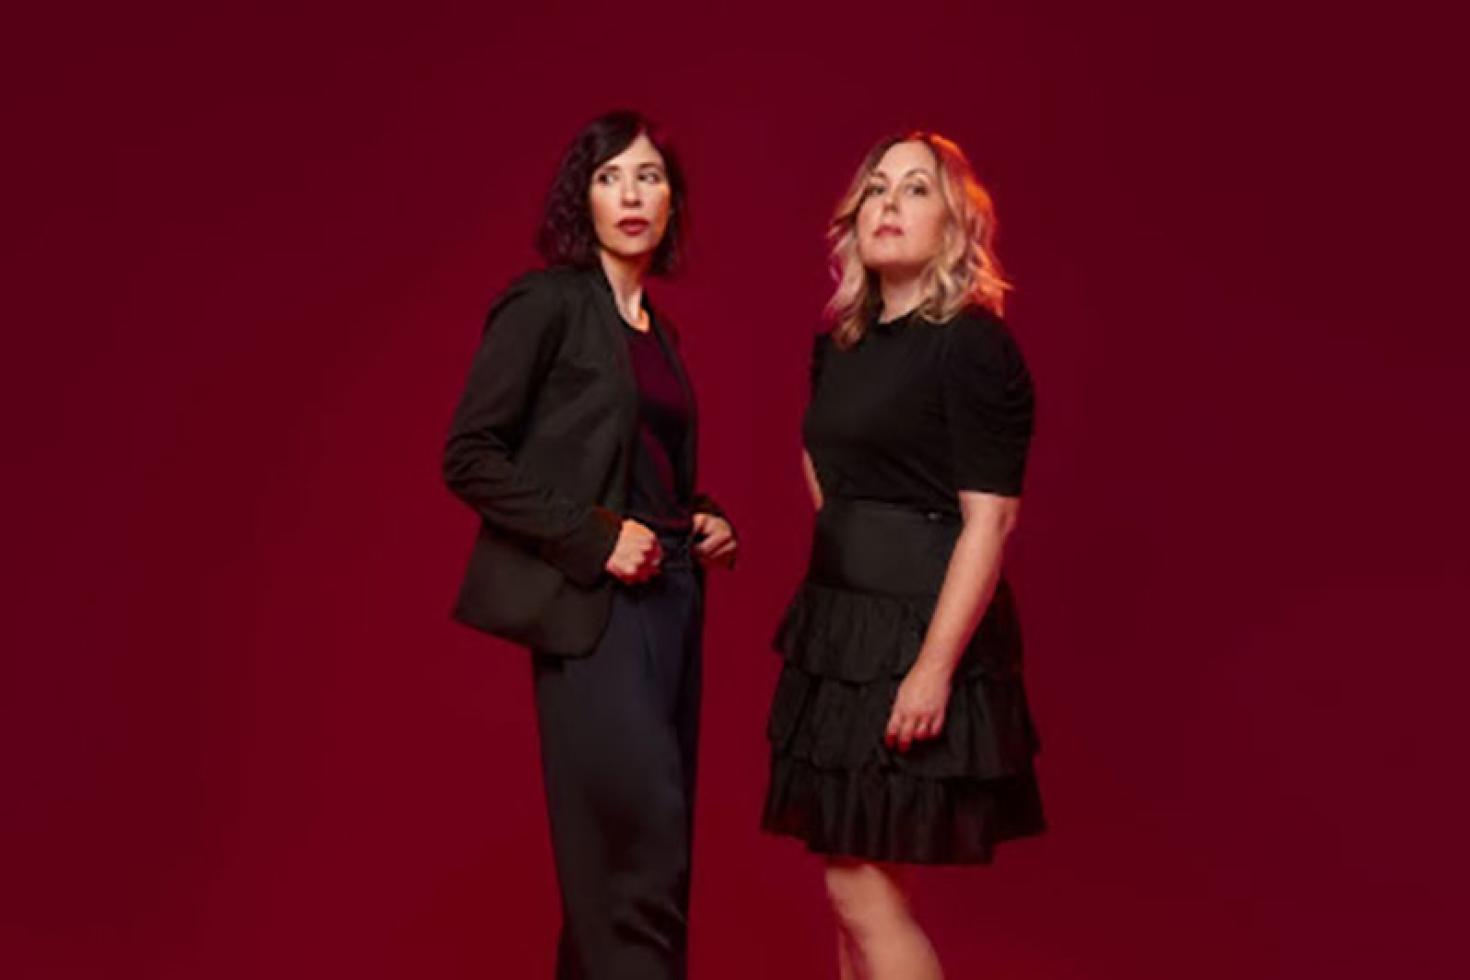 Sleater-Kinney share new single & video 'Untidy Creature'